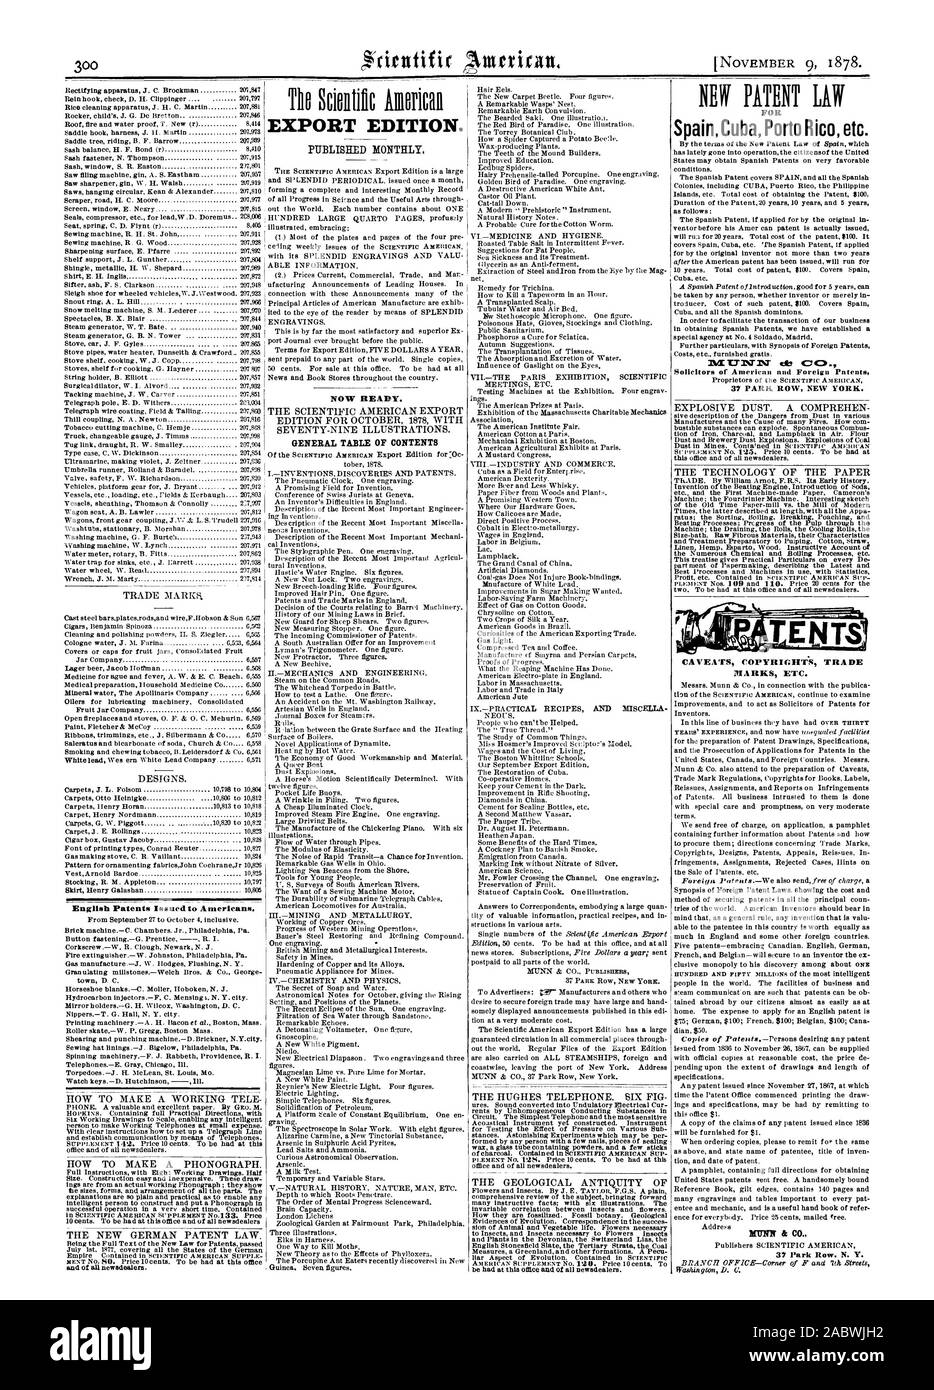 English Patents Issued to Americans. EXPORT EDITION. NEors. NEW PATENT LAW 37 PARK ROW NEW YORK. CAVEATS COPYRIGHTS TRADE MARKS ETC. NUN' & 37 Park Row N. Y. NOW READY. GENERAL TABLE OF CONTENTS FOR, scientific american, 1878-11-09 Stock Photo